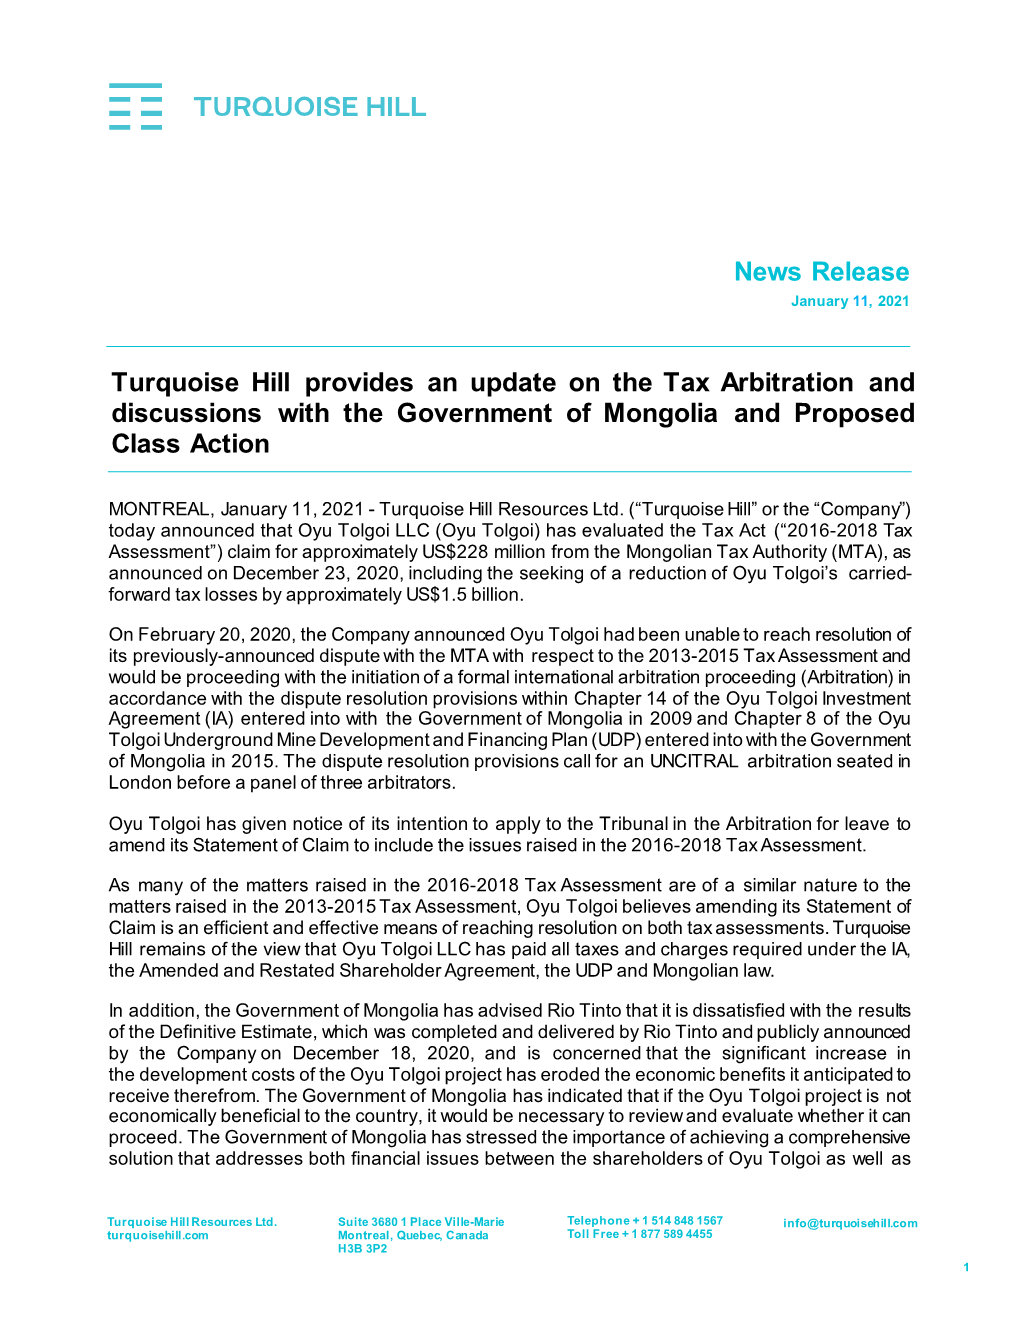 Turquoise Hill Provides an Update on the Tax Arbitration and Discussions